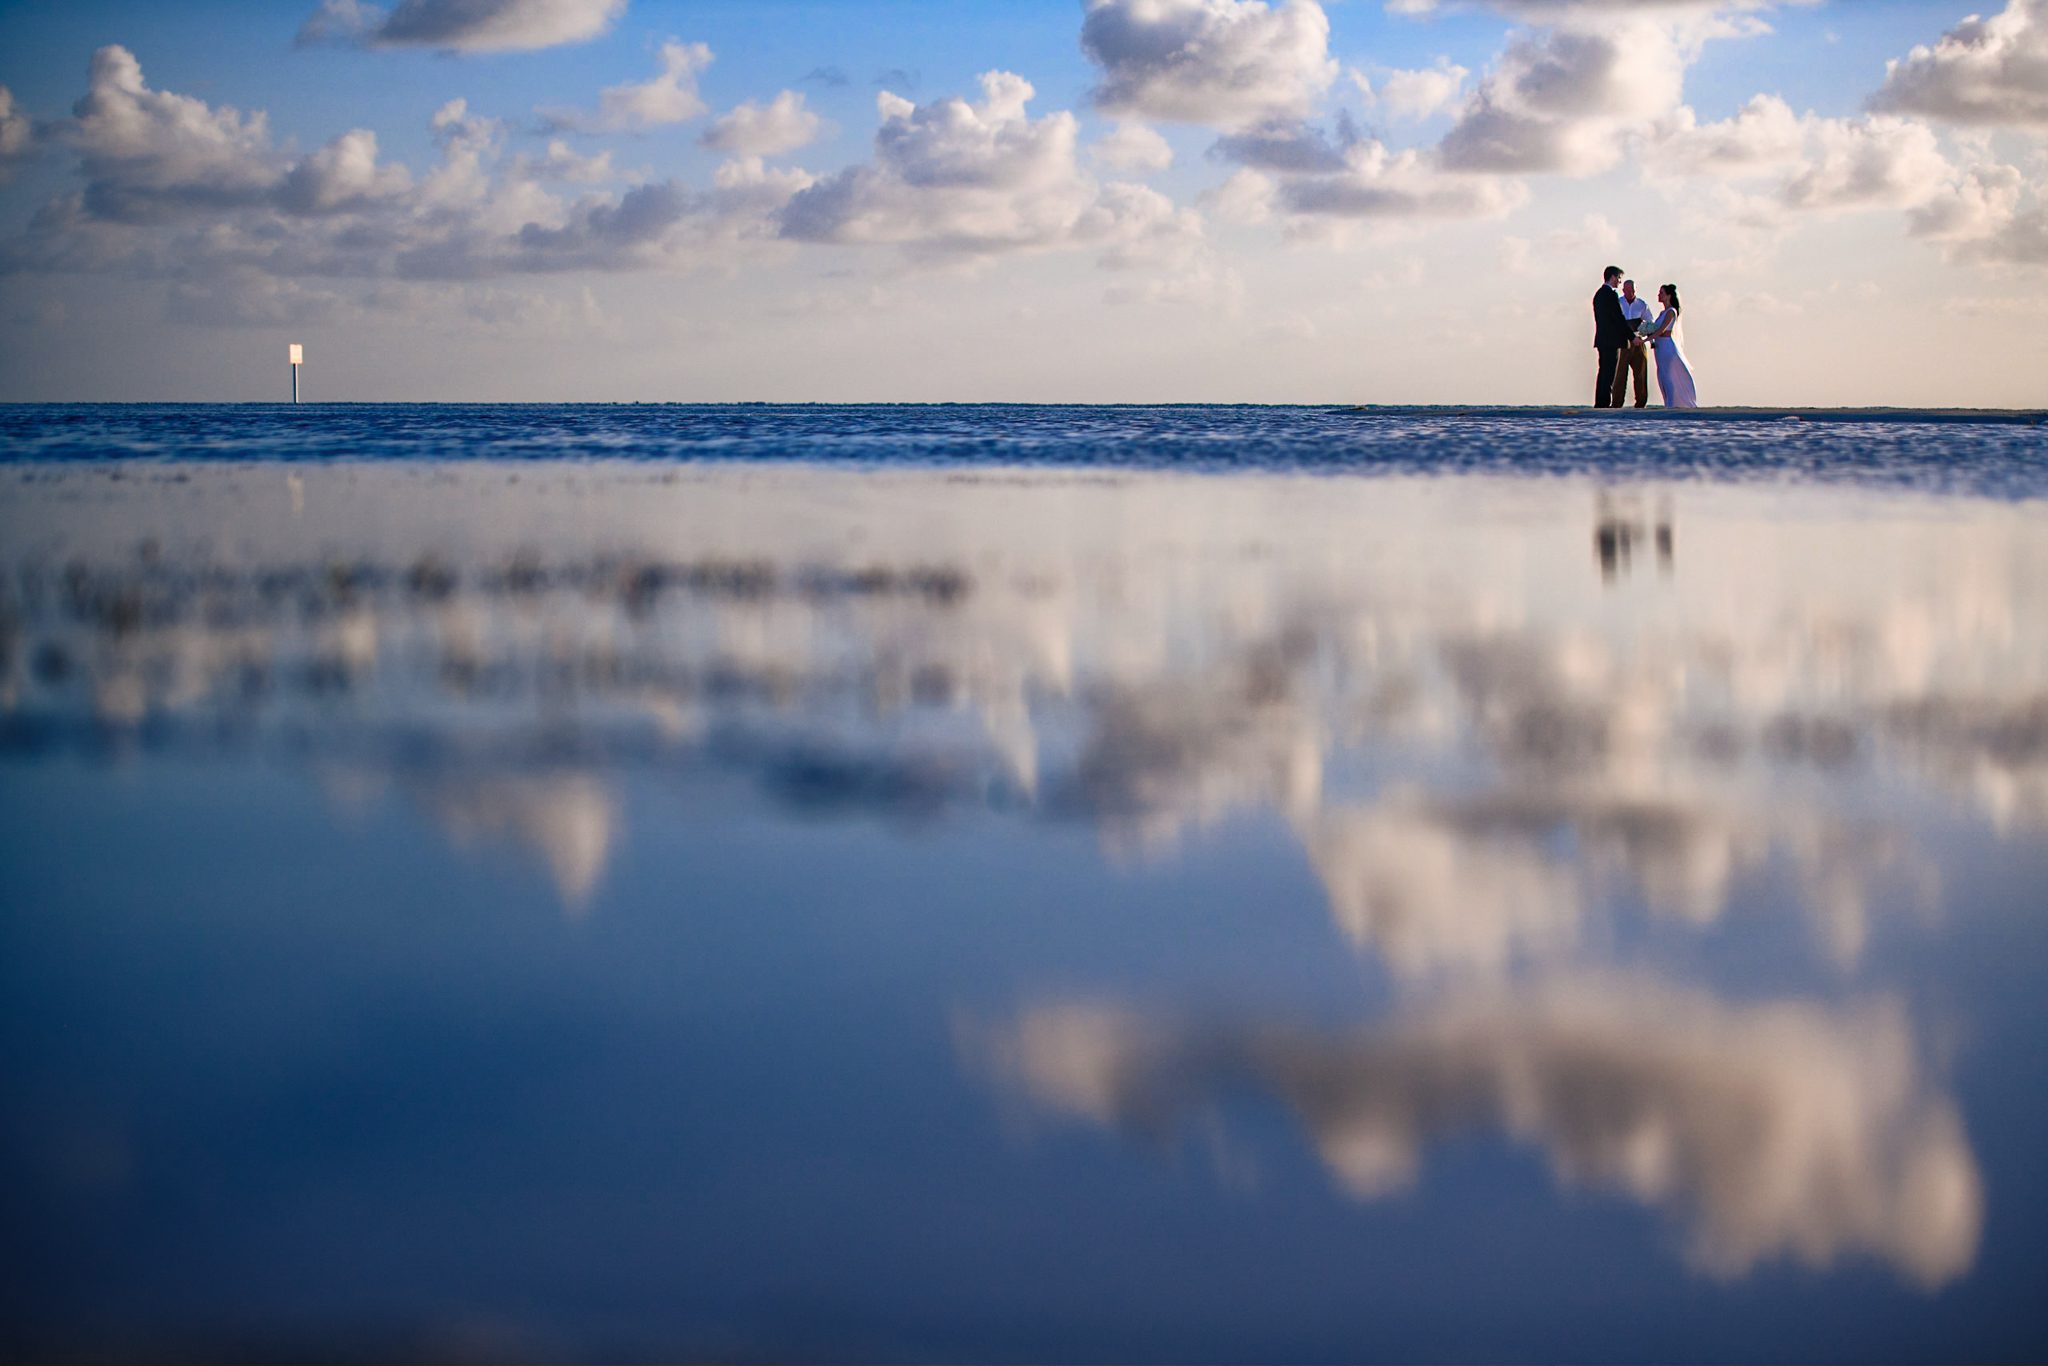 couple has elopement ceremony on sandbar in florida keys at little palm island with calm water in foreground